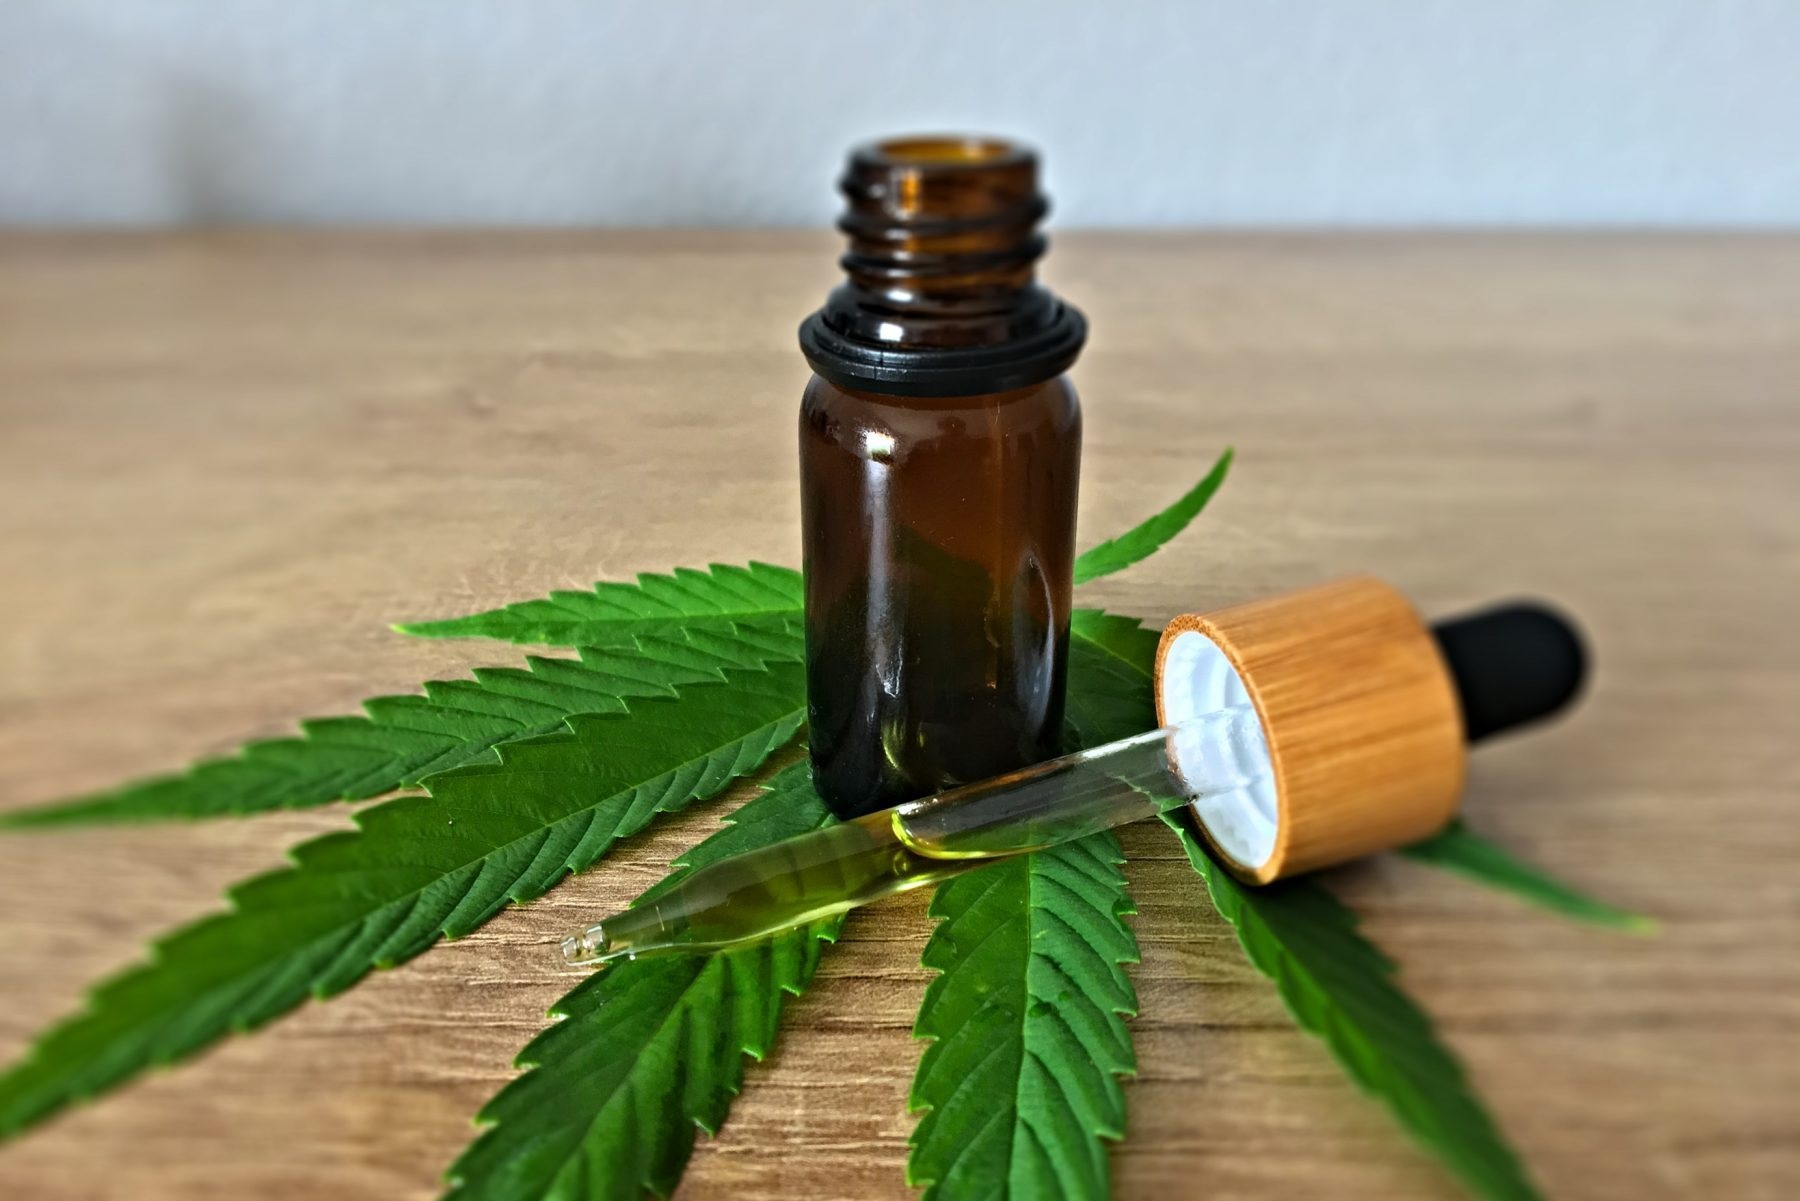 There are few drugs which can be interacting with CBD.